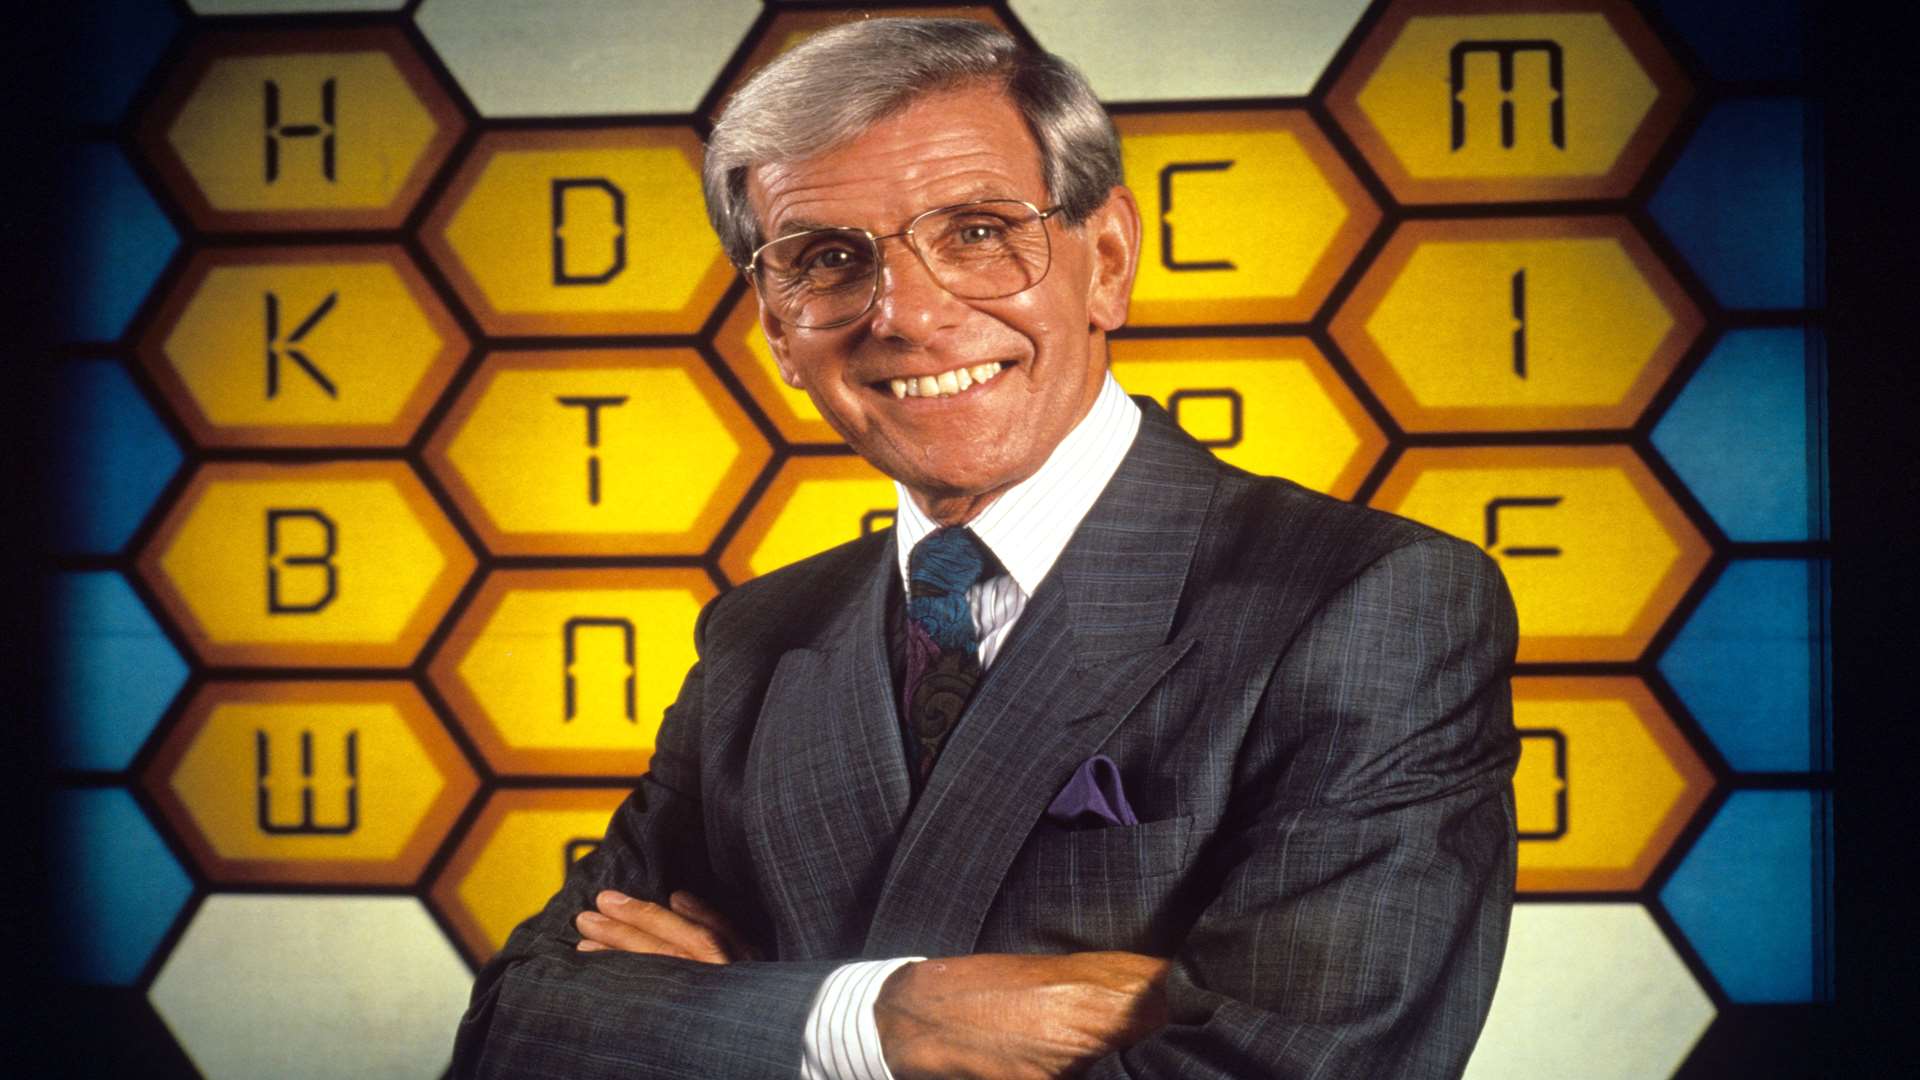 Mr Holness was known for presenting Blockbusters